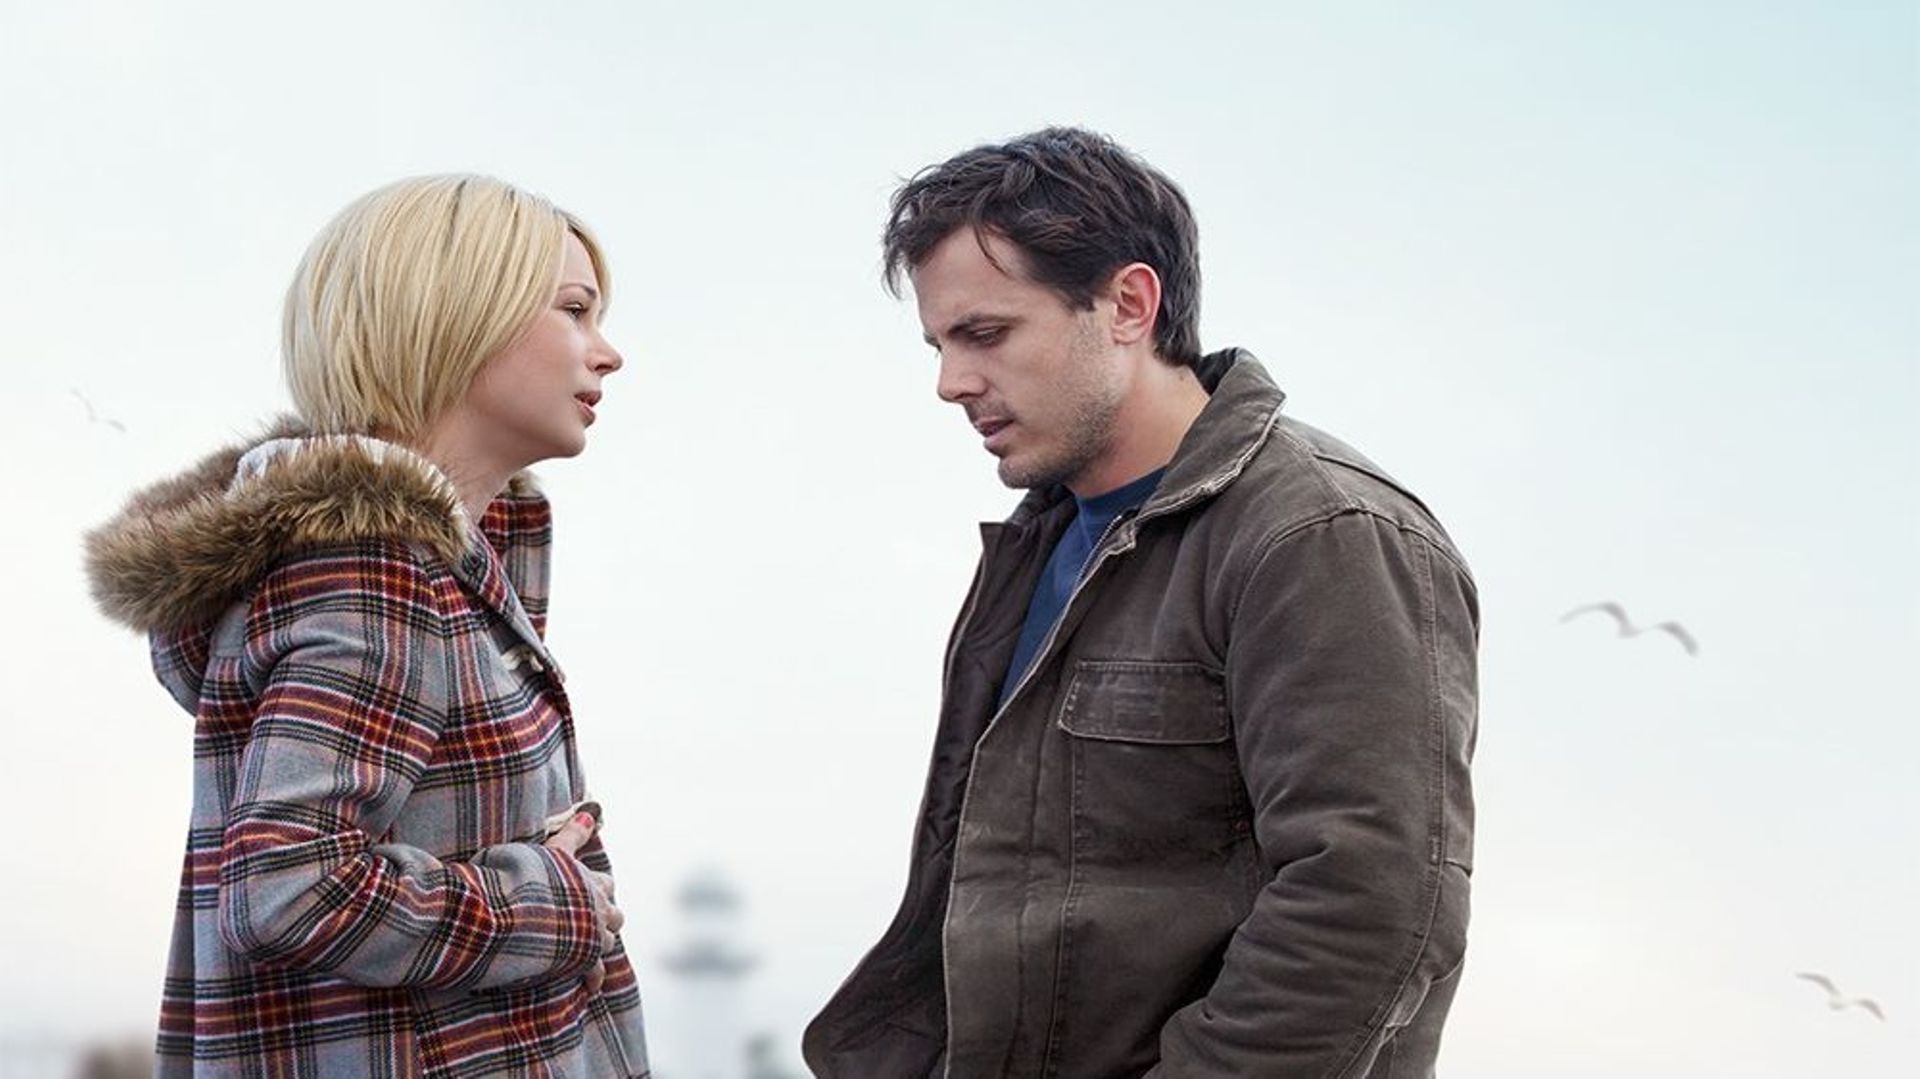 Manchester by the sea